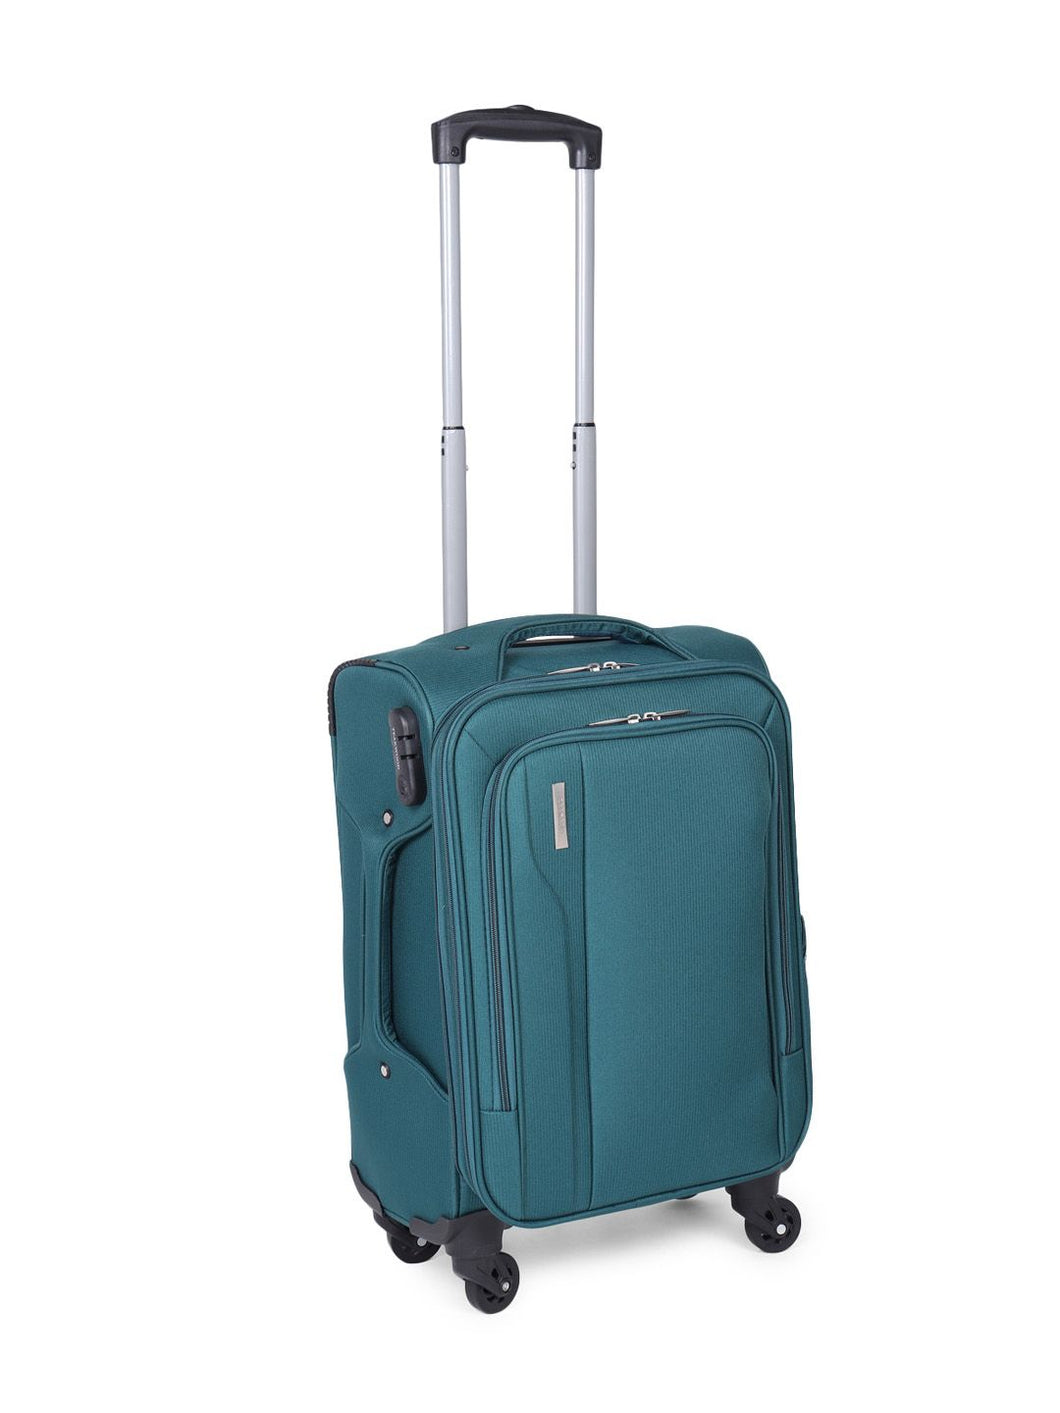 Unisex Teal Solid Soft-sided Cabin Trolley Suitcase (Small)